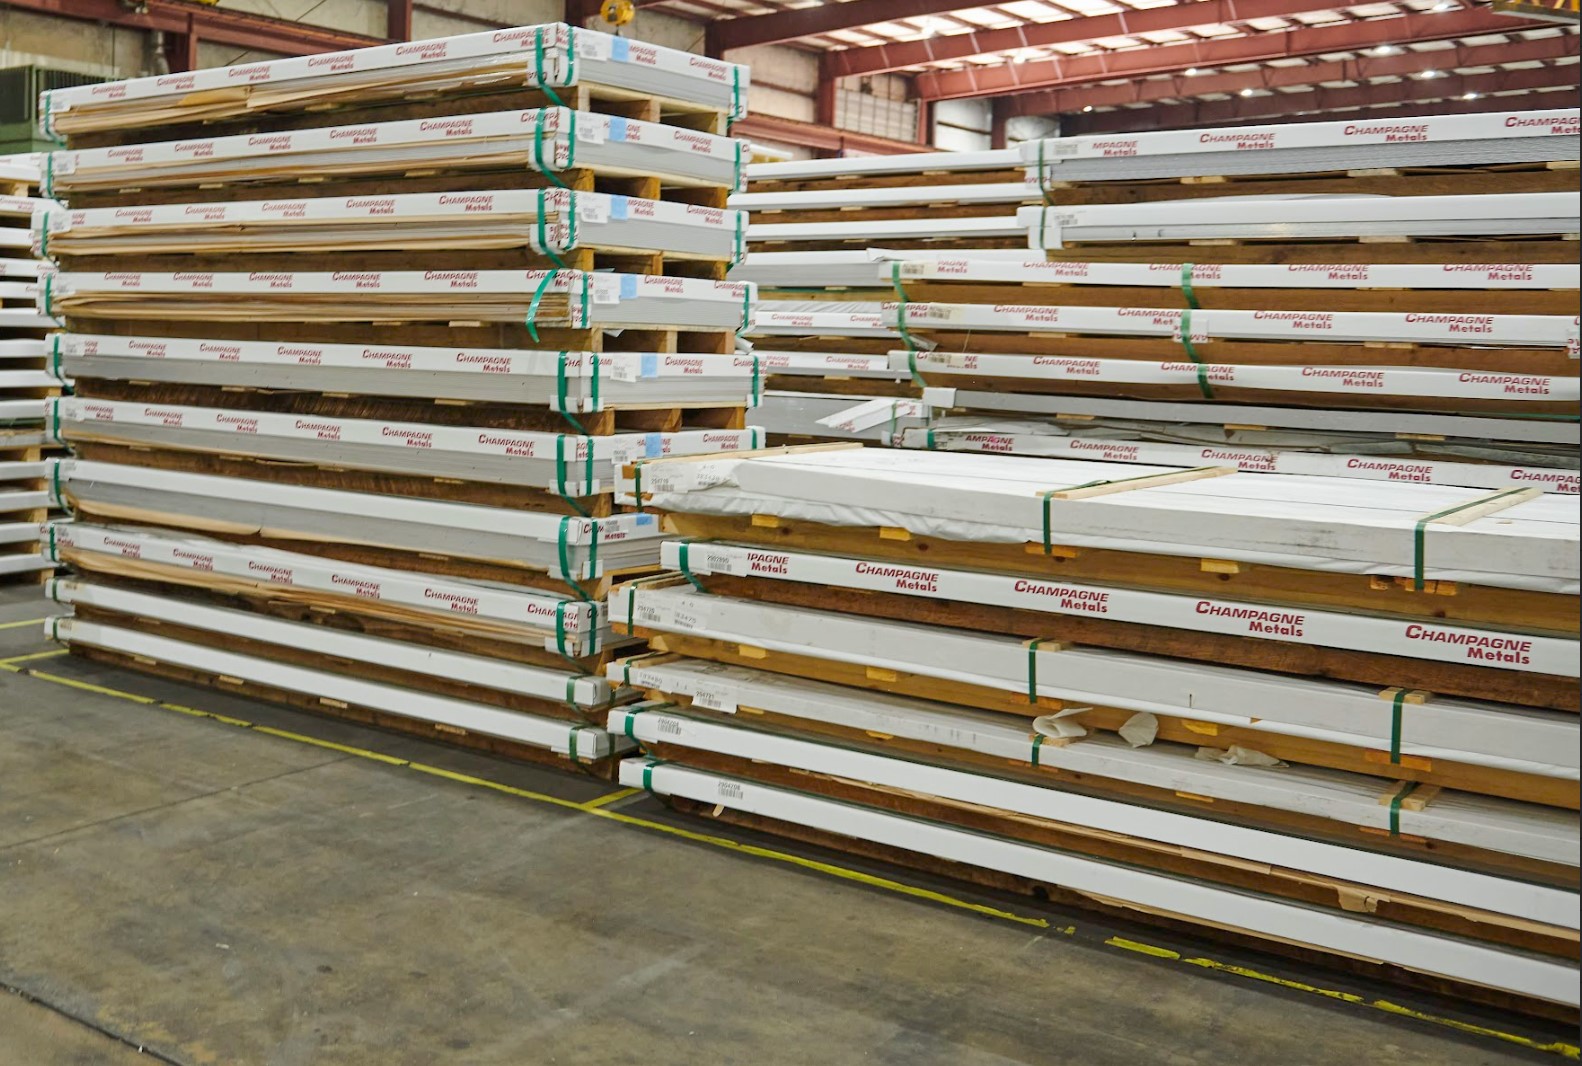 stacks of aluminum sheet stock in a warehouse